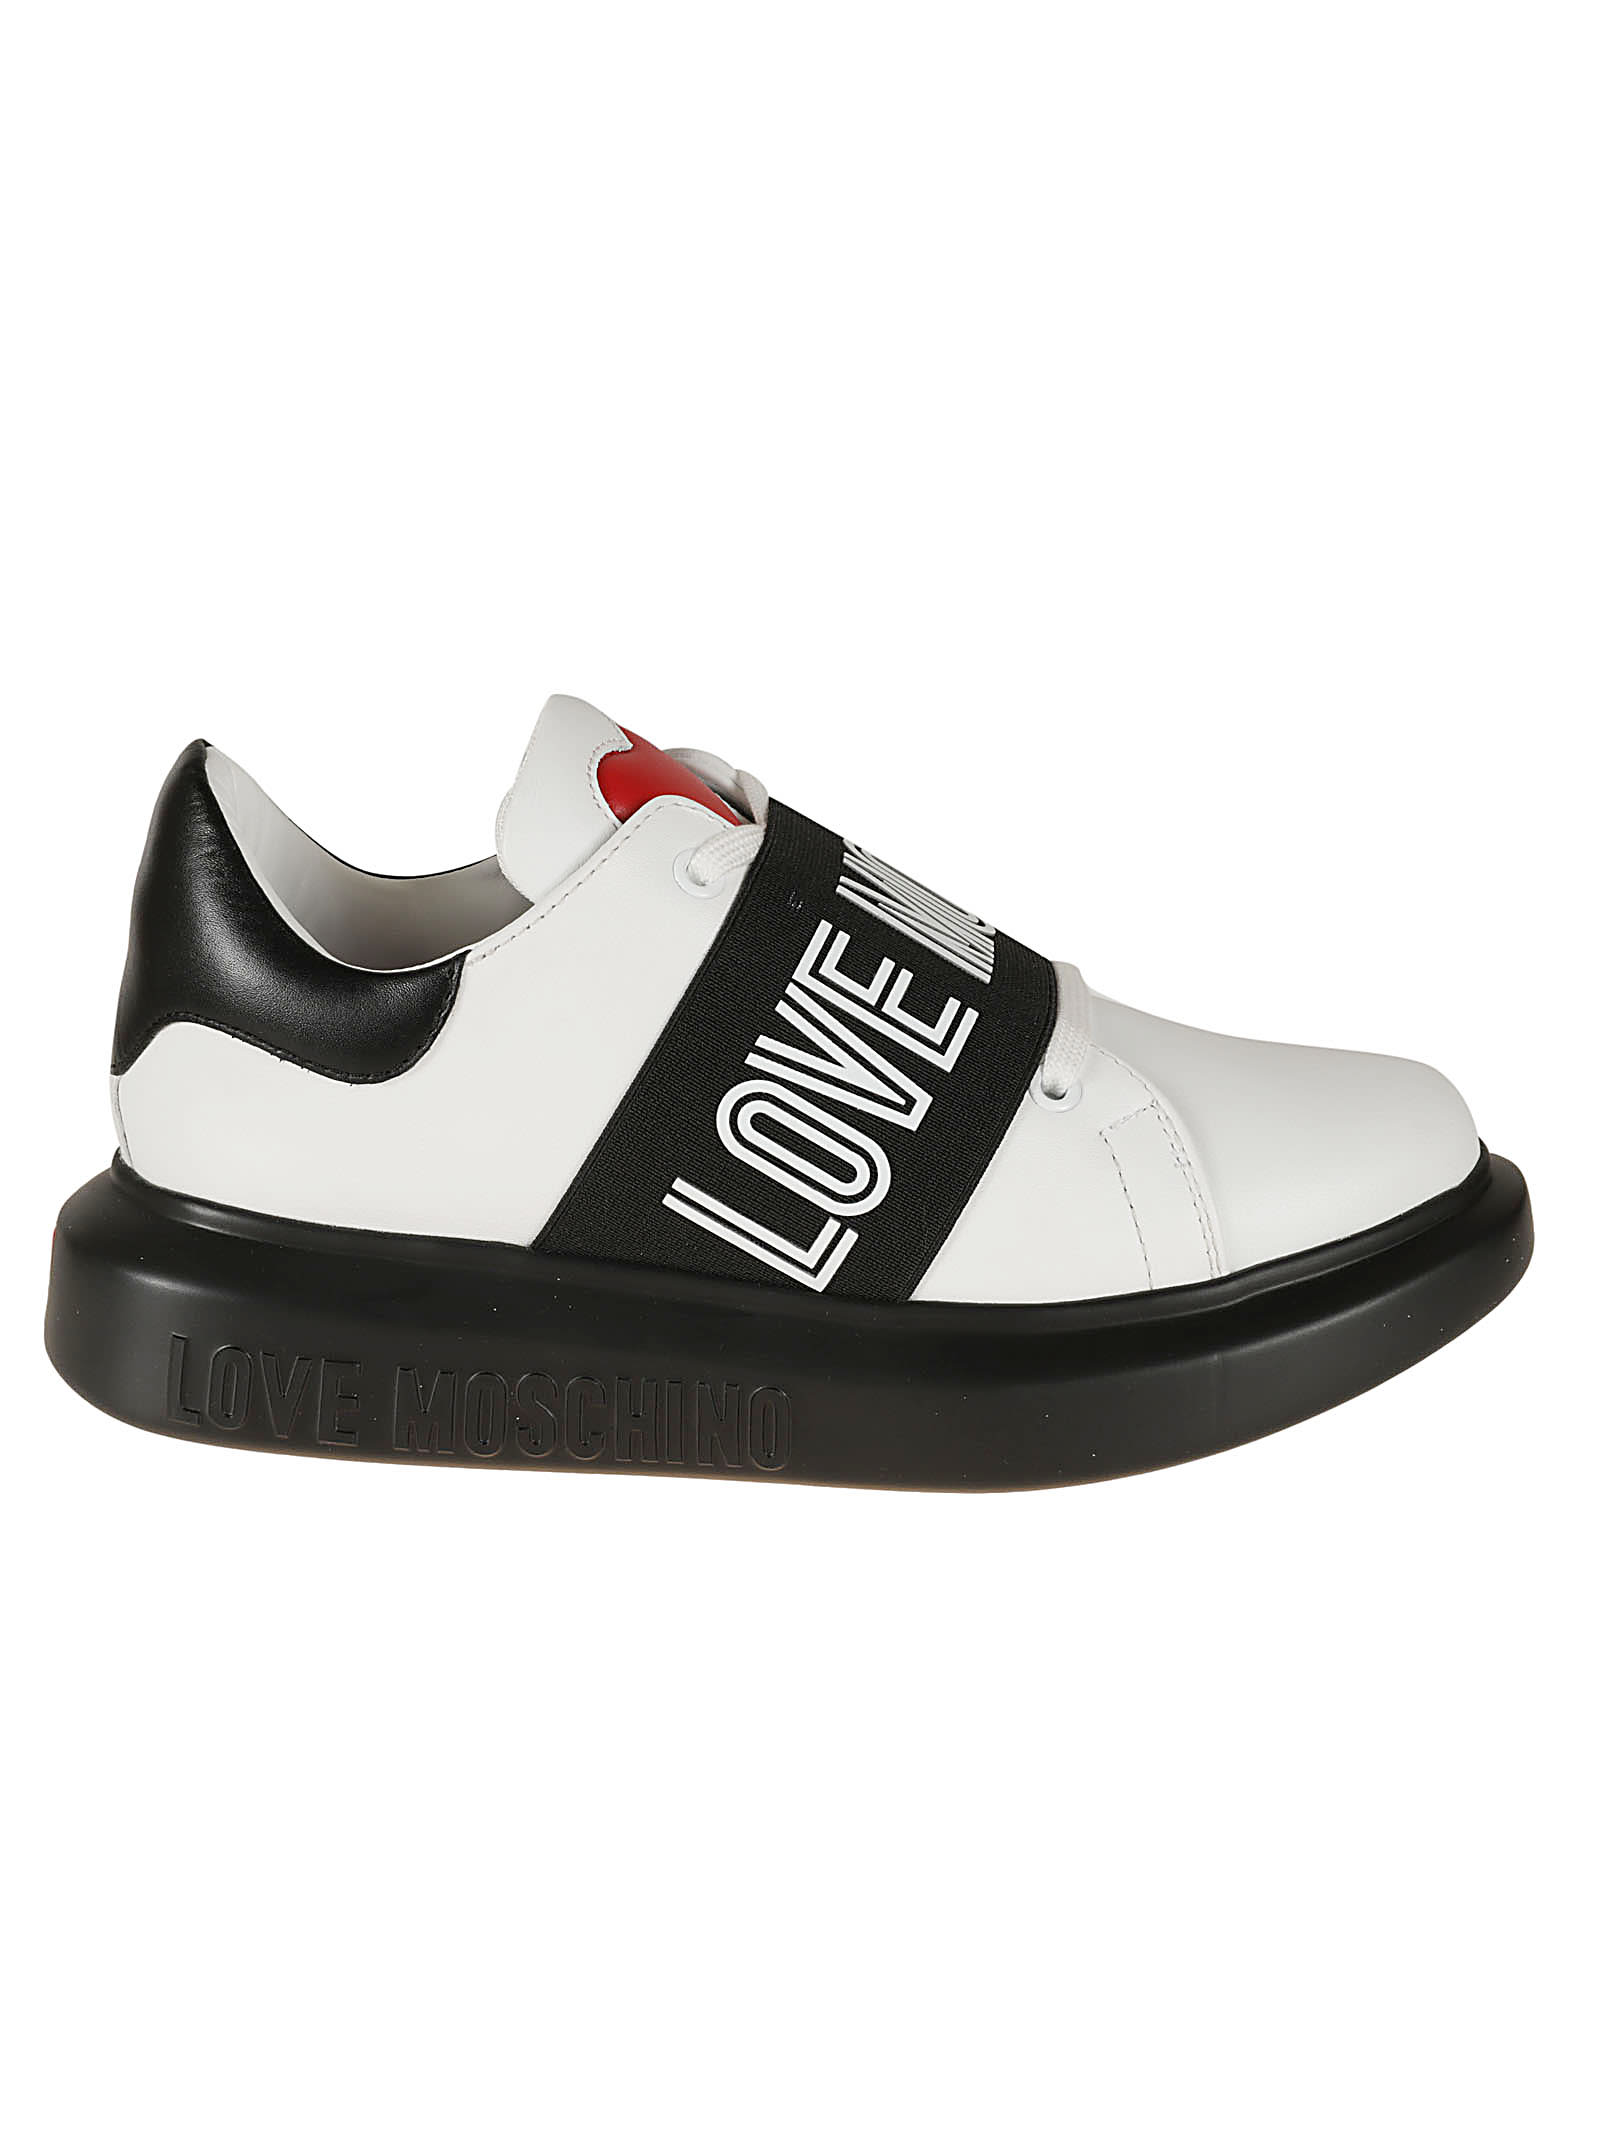 Love Moschino Logo Front Platform Sneakers